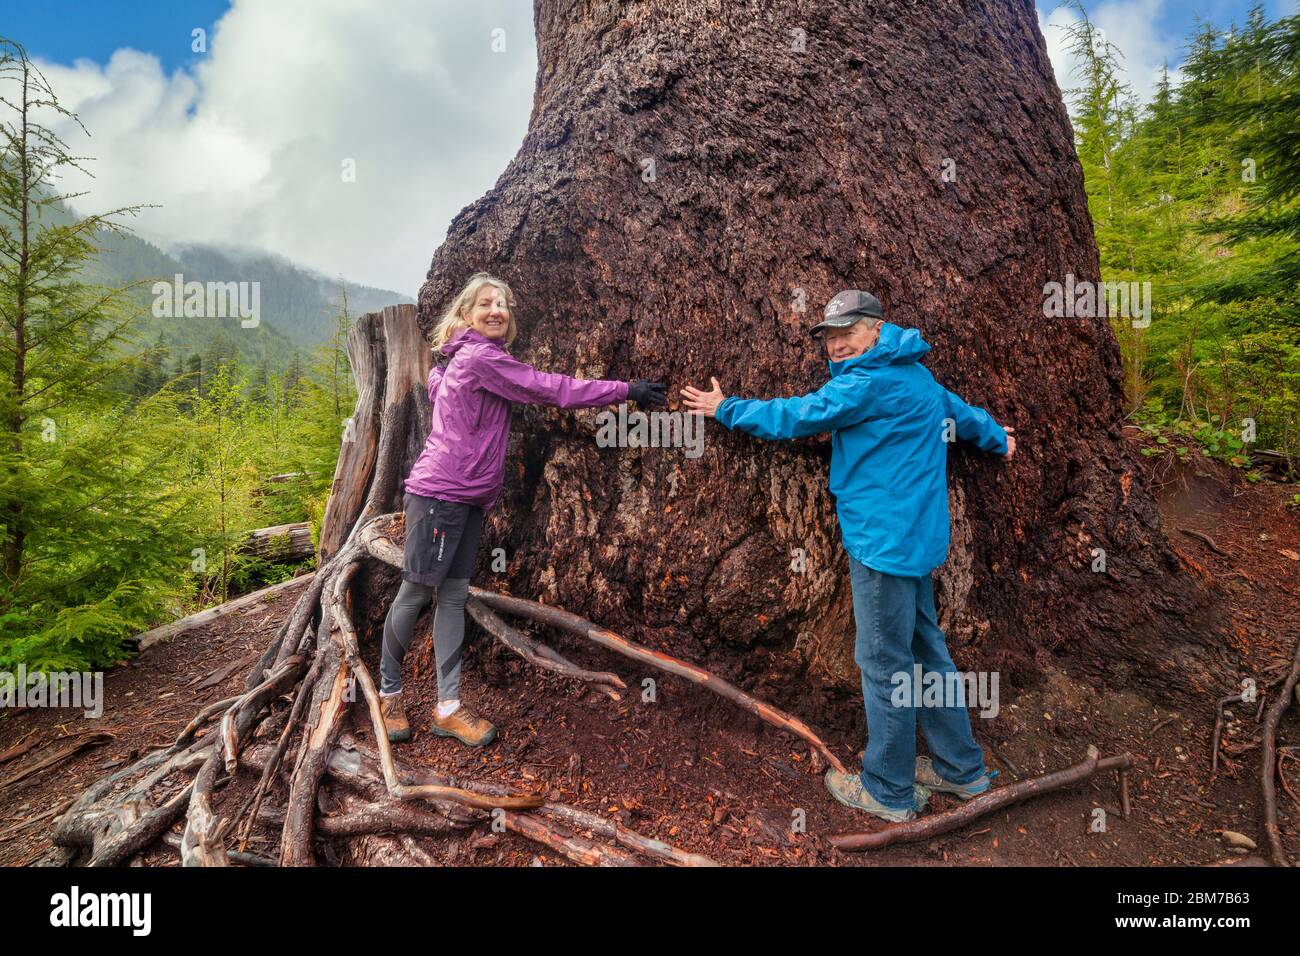 Couple showing scale and circumference of Big Lonely Doug Douglas fir tree-Second tallest tree in Canada-Port Renfrew, British Columbia, Canada. Stock Photo